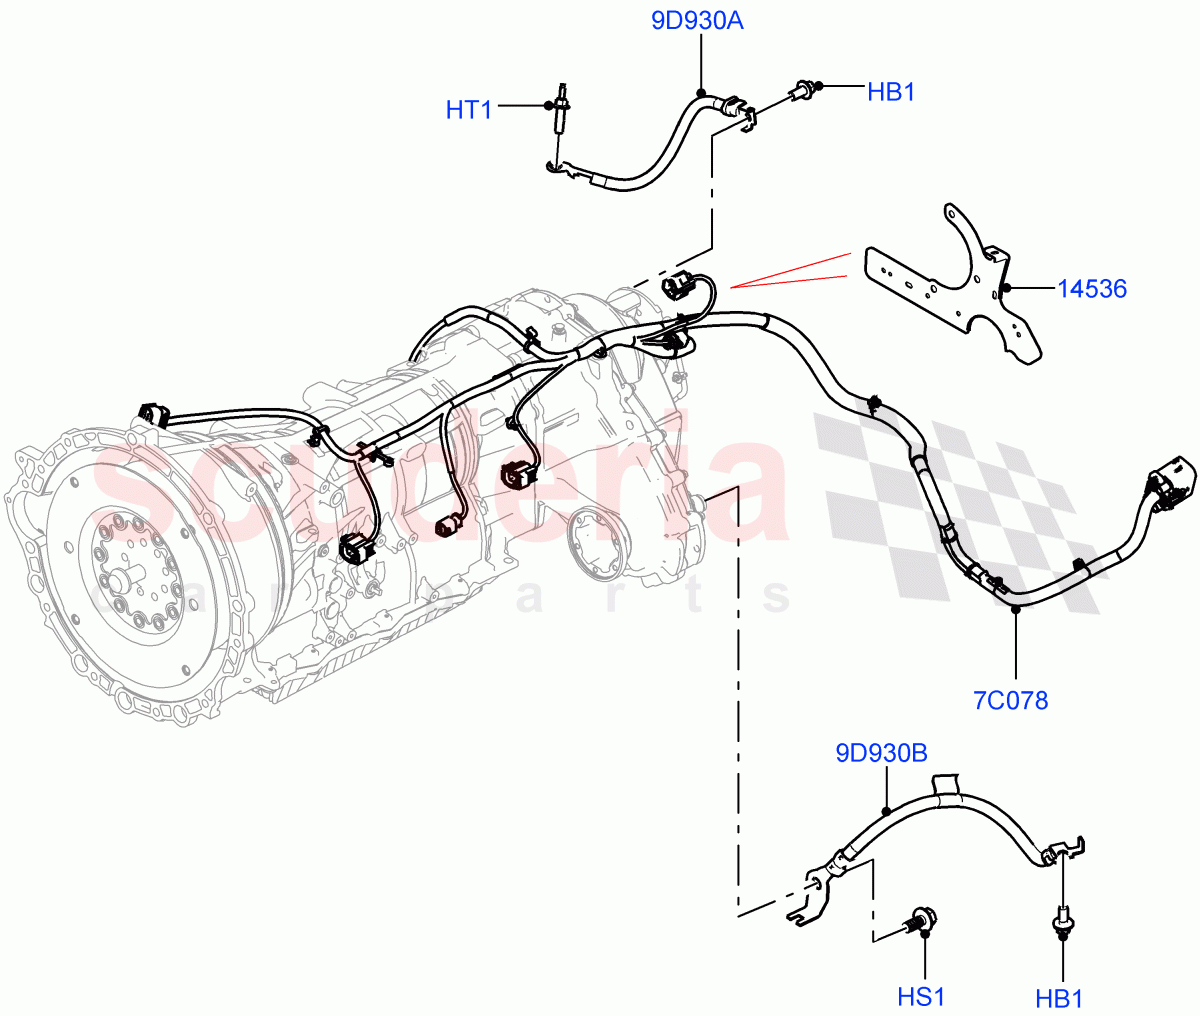 Transmission Harness(Nitra Plant Build)((V)FROMK2000001,(V)TOL2999999) of Land Rover Land Rover Discovery 5 (2017+) [2.0 Turbo Diesel]